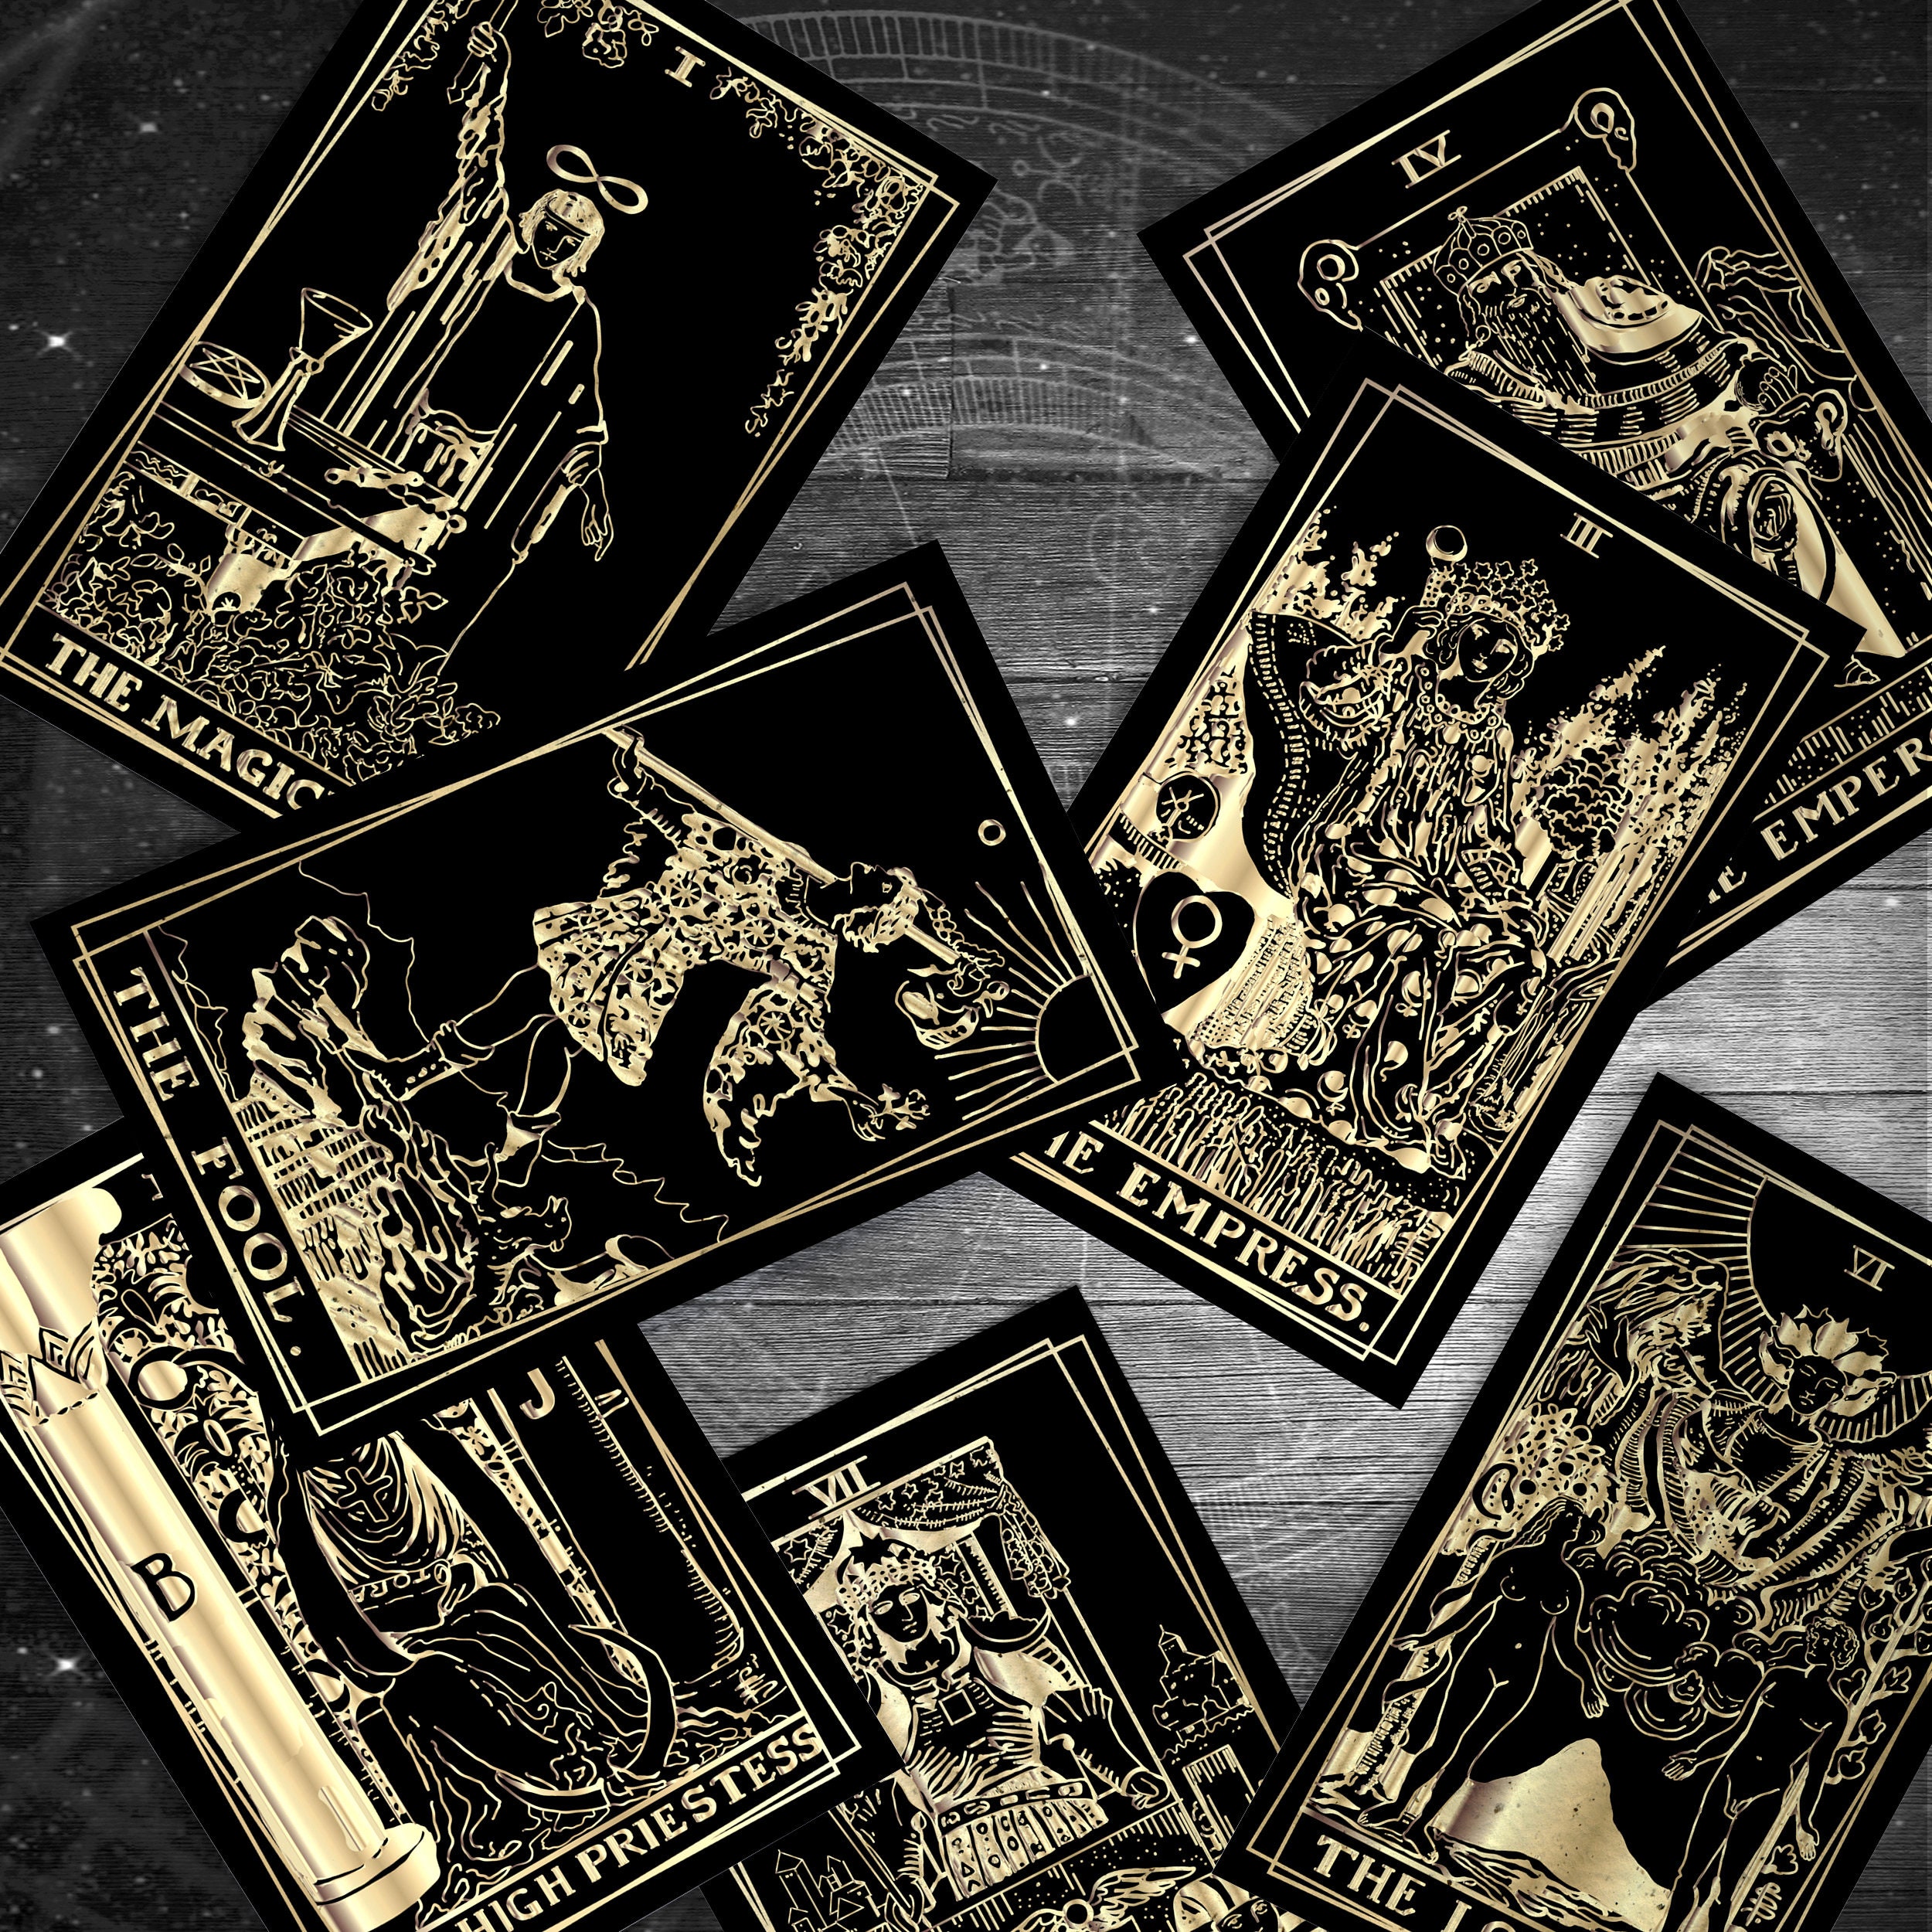 Learn Tarot Card Reading - Free Online Course - Alison